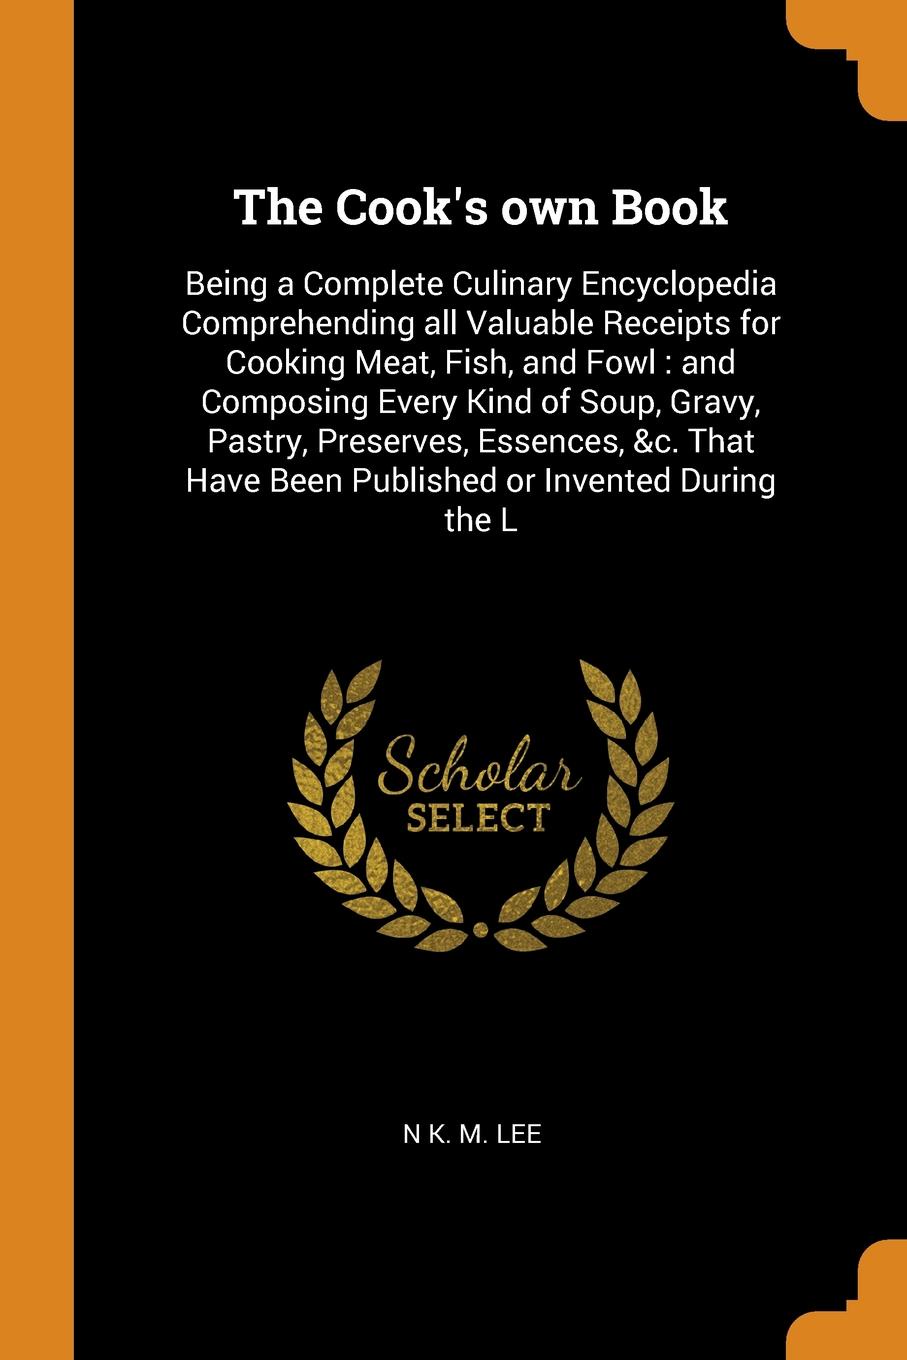 The Cook`s own Book. Being a Complete Culinary Encyclopedia Comprehending all Valuable Receipts for Cooking Meat, Fish, and Fowl : and Composing Every Kind of Soup, Gravy, Pastry, Preserves, Essences, &c. That Have Been Published or Invented Durin...